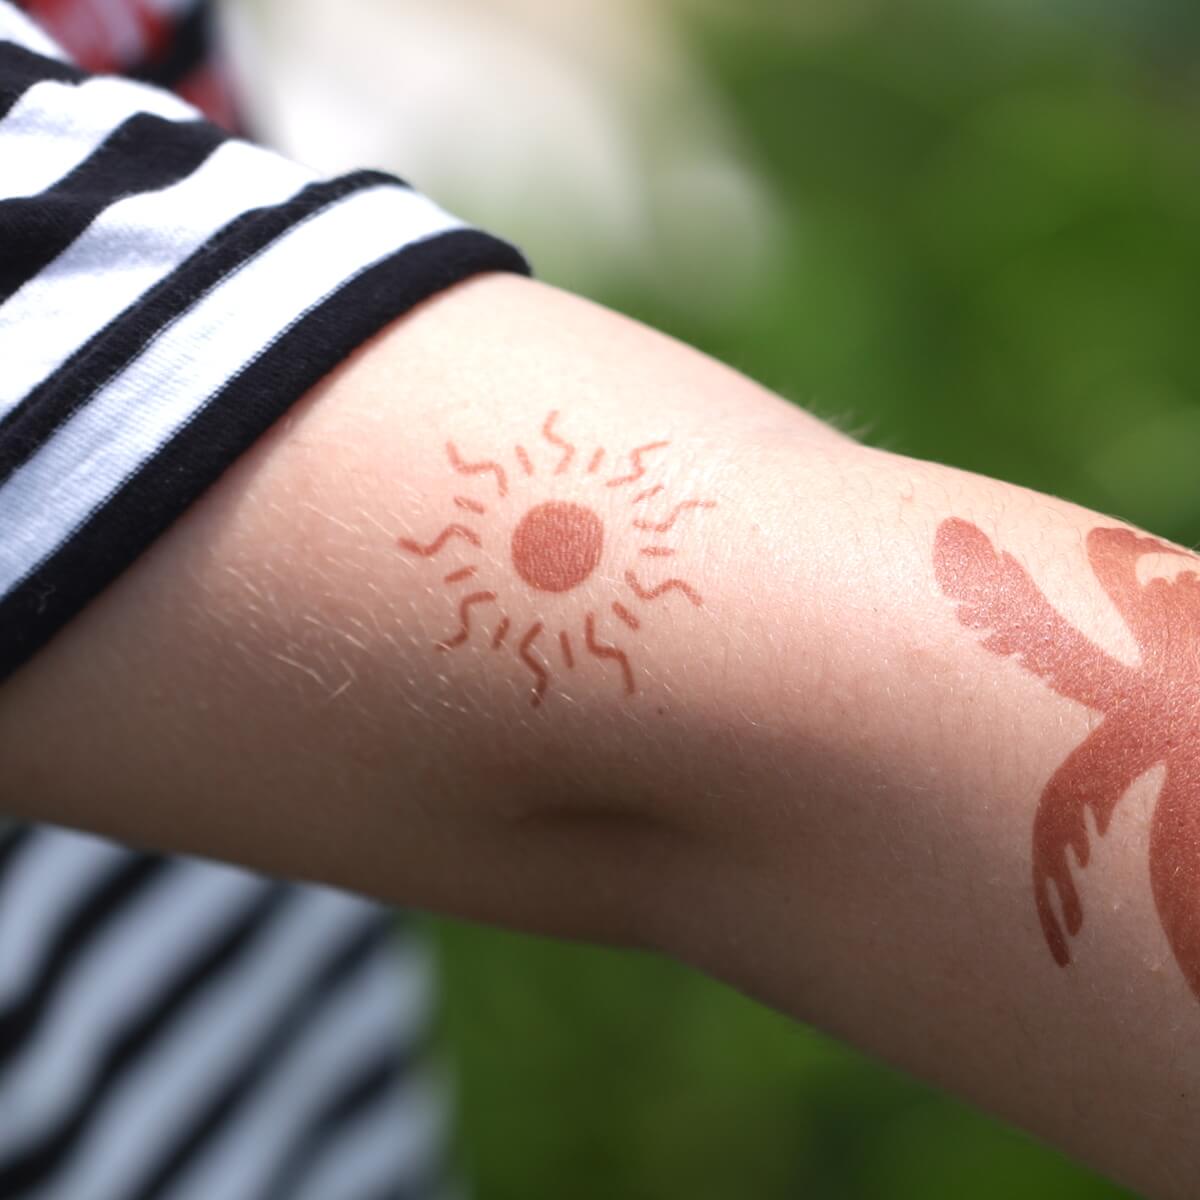 A womans hand with a henna Mehndi flower tattoo touches a mans hand with  a henna Mehndi sun tattoo  Stock Image  Everypixel